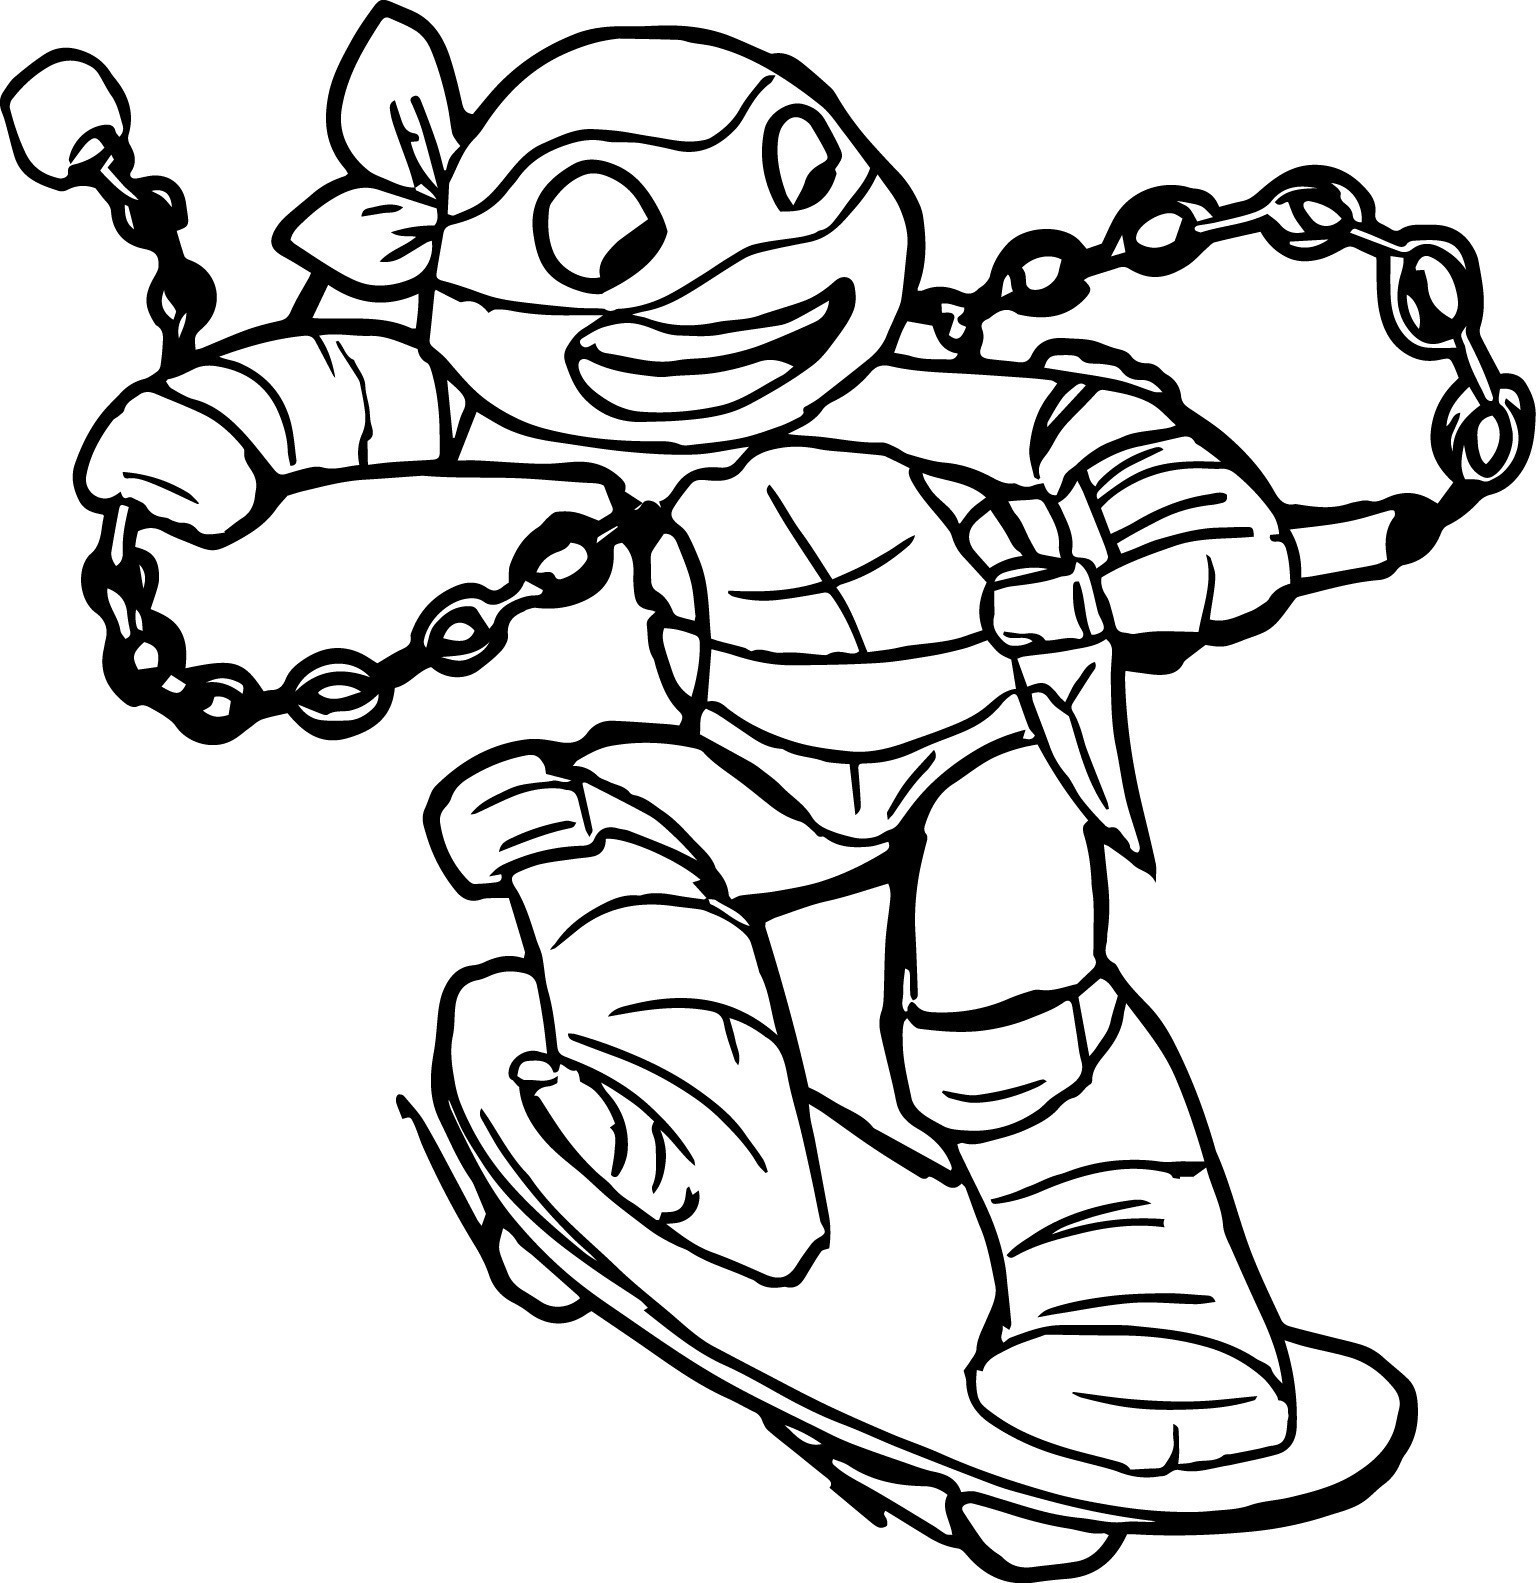 Free Coloring Pages For Boys Turtle
 Teenage Mutant Ninja Turtles Coloring Pages Best